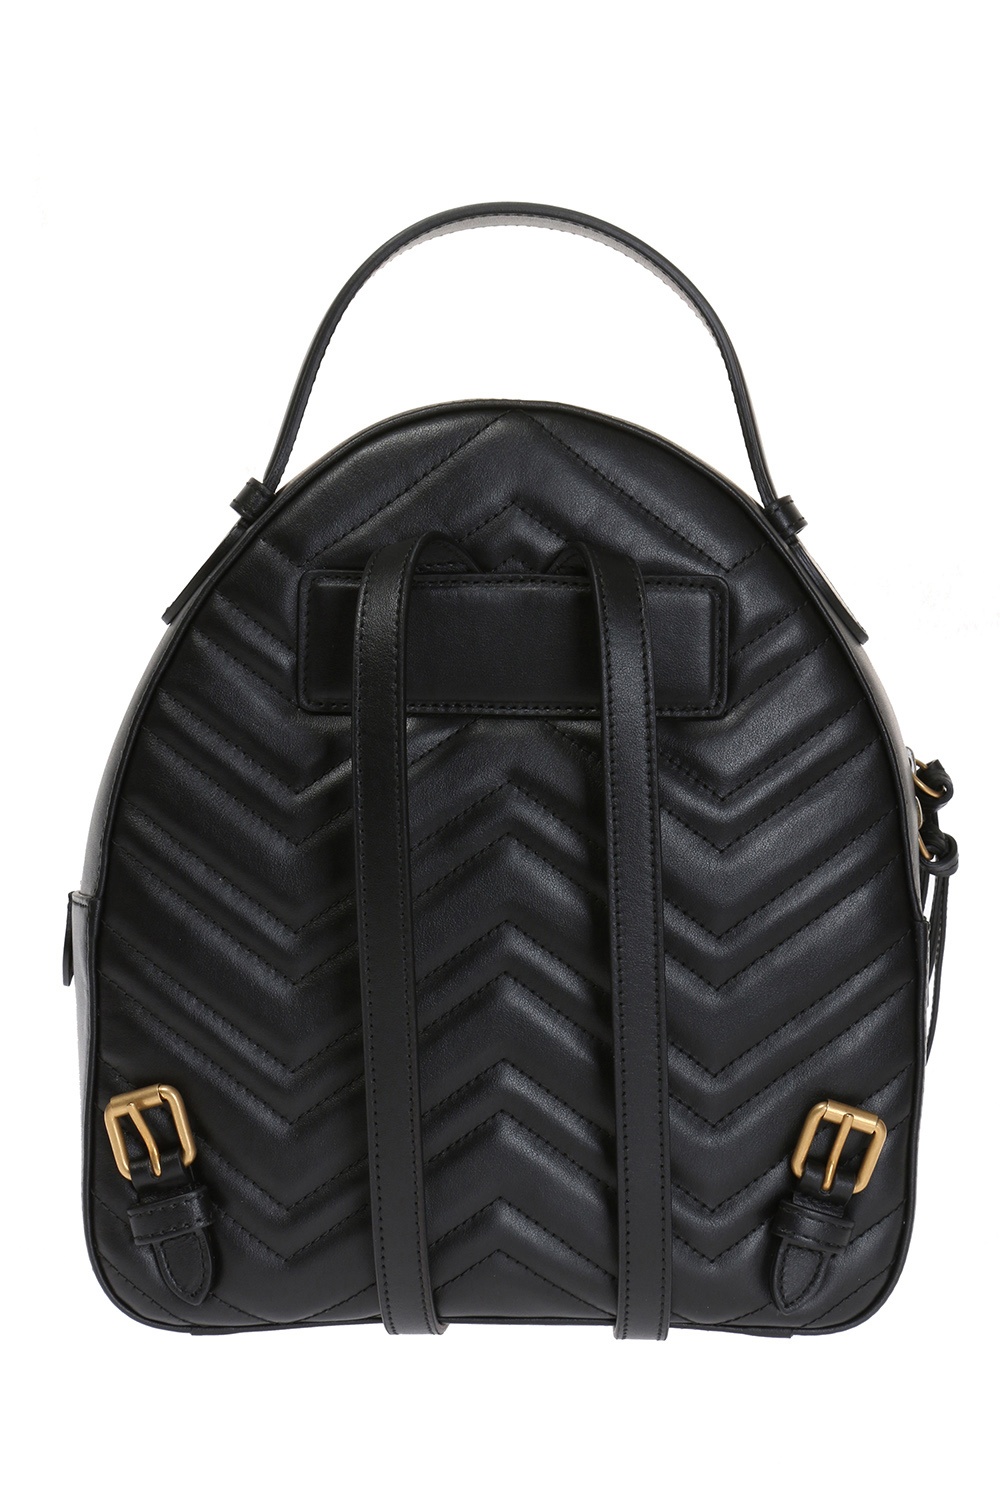 BALO NỮ GUCCI MARMONT BACKPACK 15